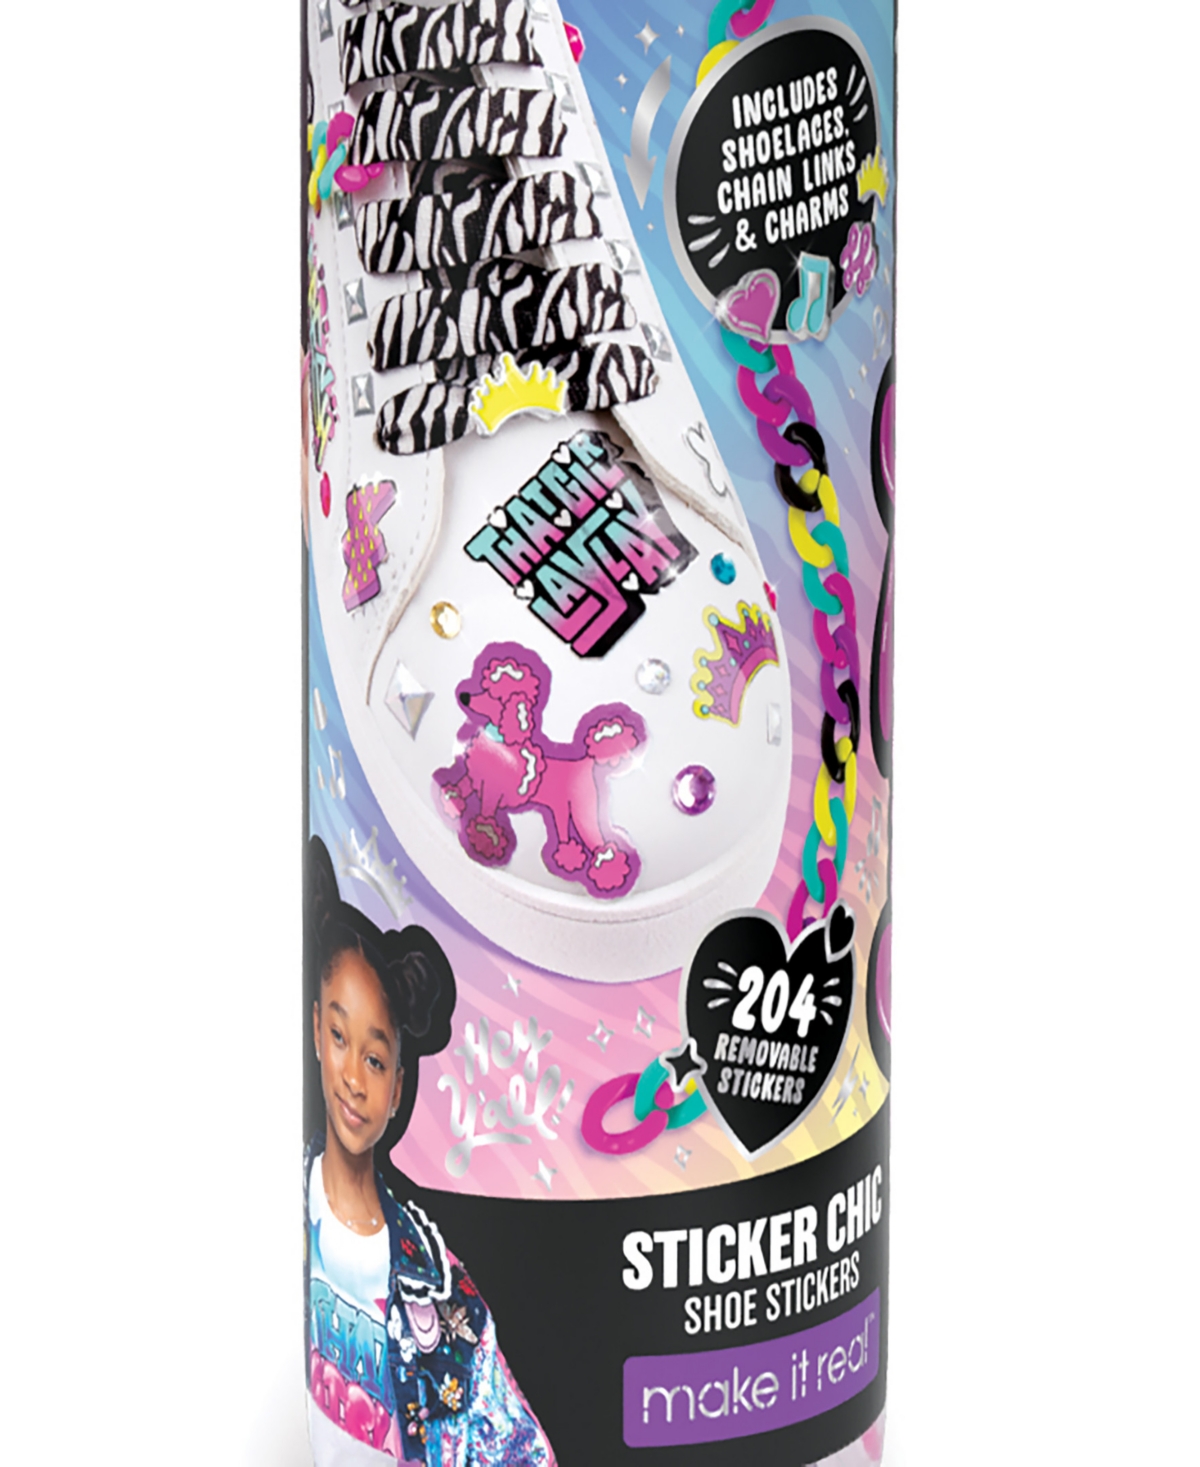 Shop That Girl Lay Lay Sticker Chic Shoe Stickers, Shoelaces, Links Charms, Make It Real, Nickelodeon, 204 Removable Sticke In Multi